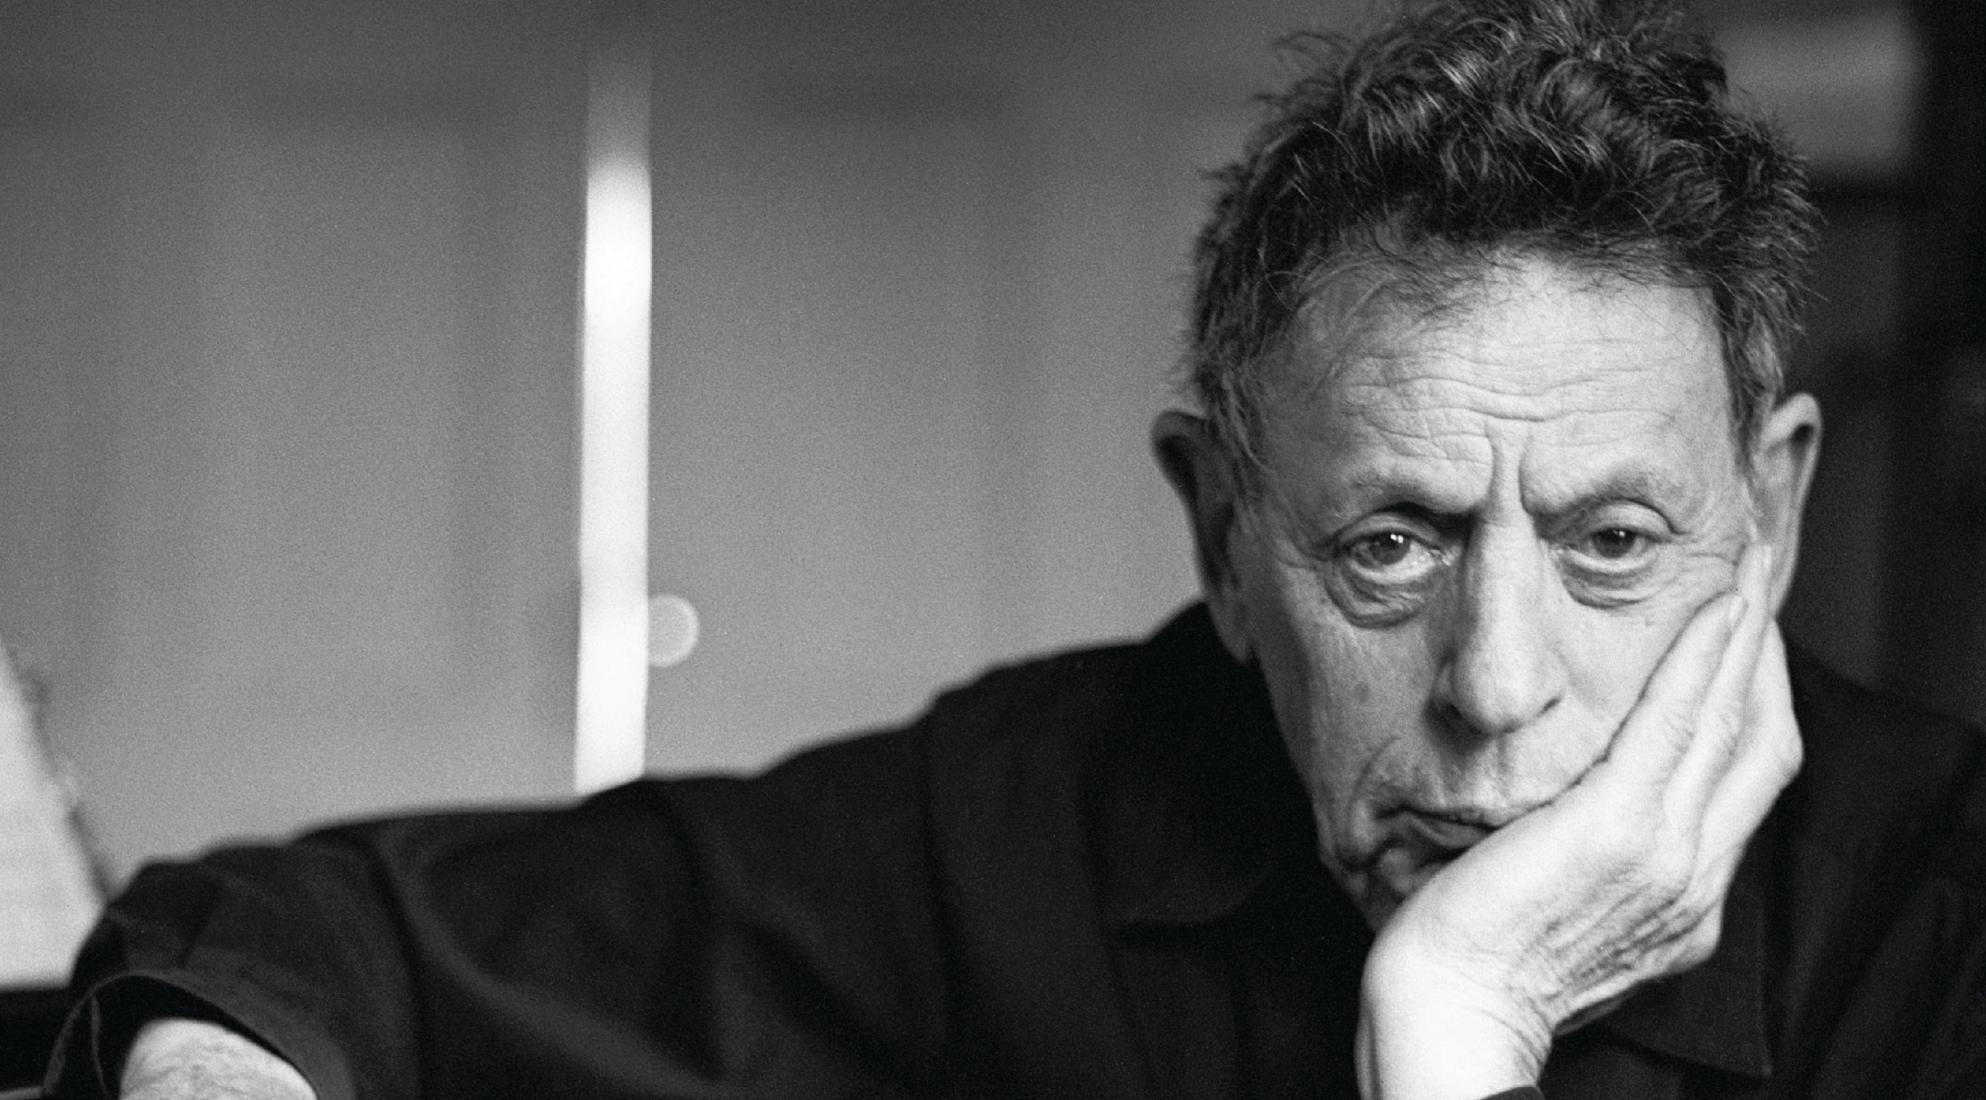 Philip Glass looking into the camera with a stern look.